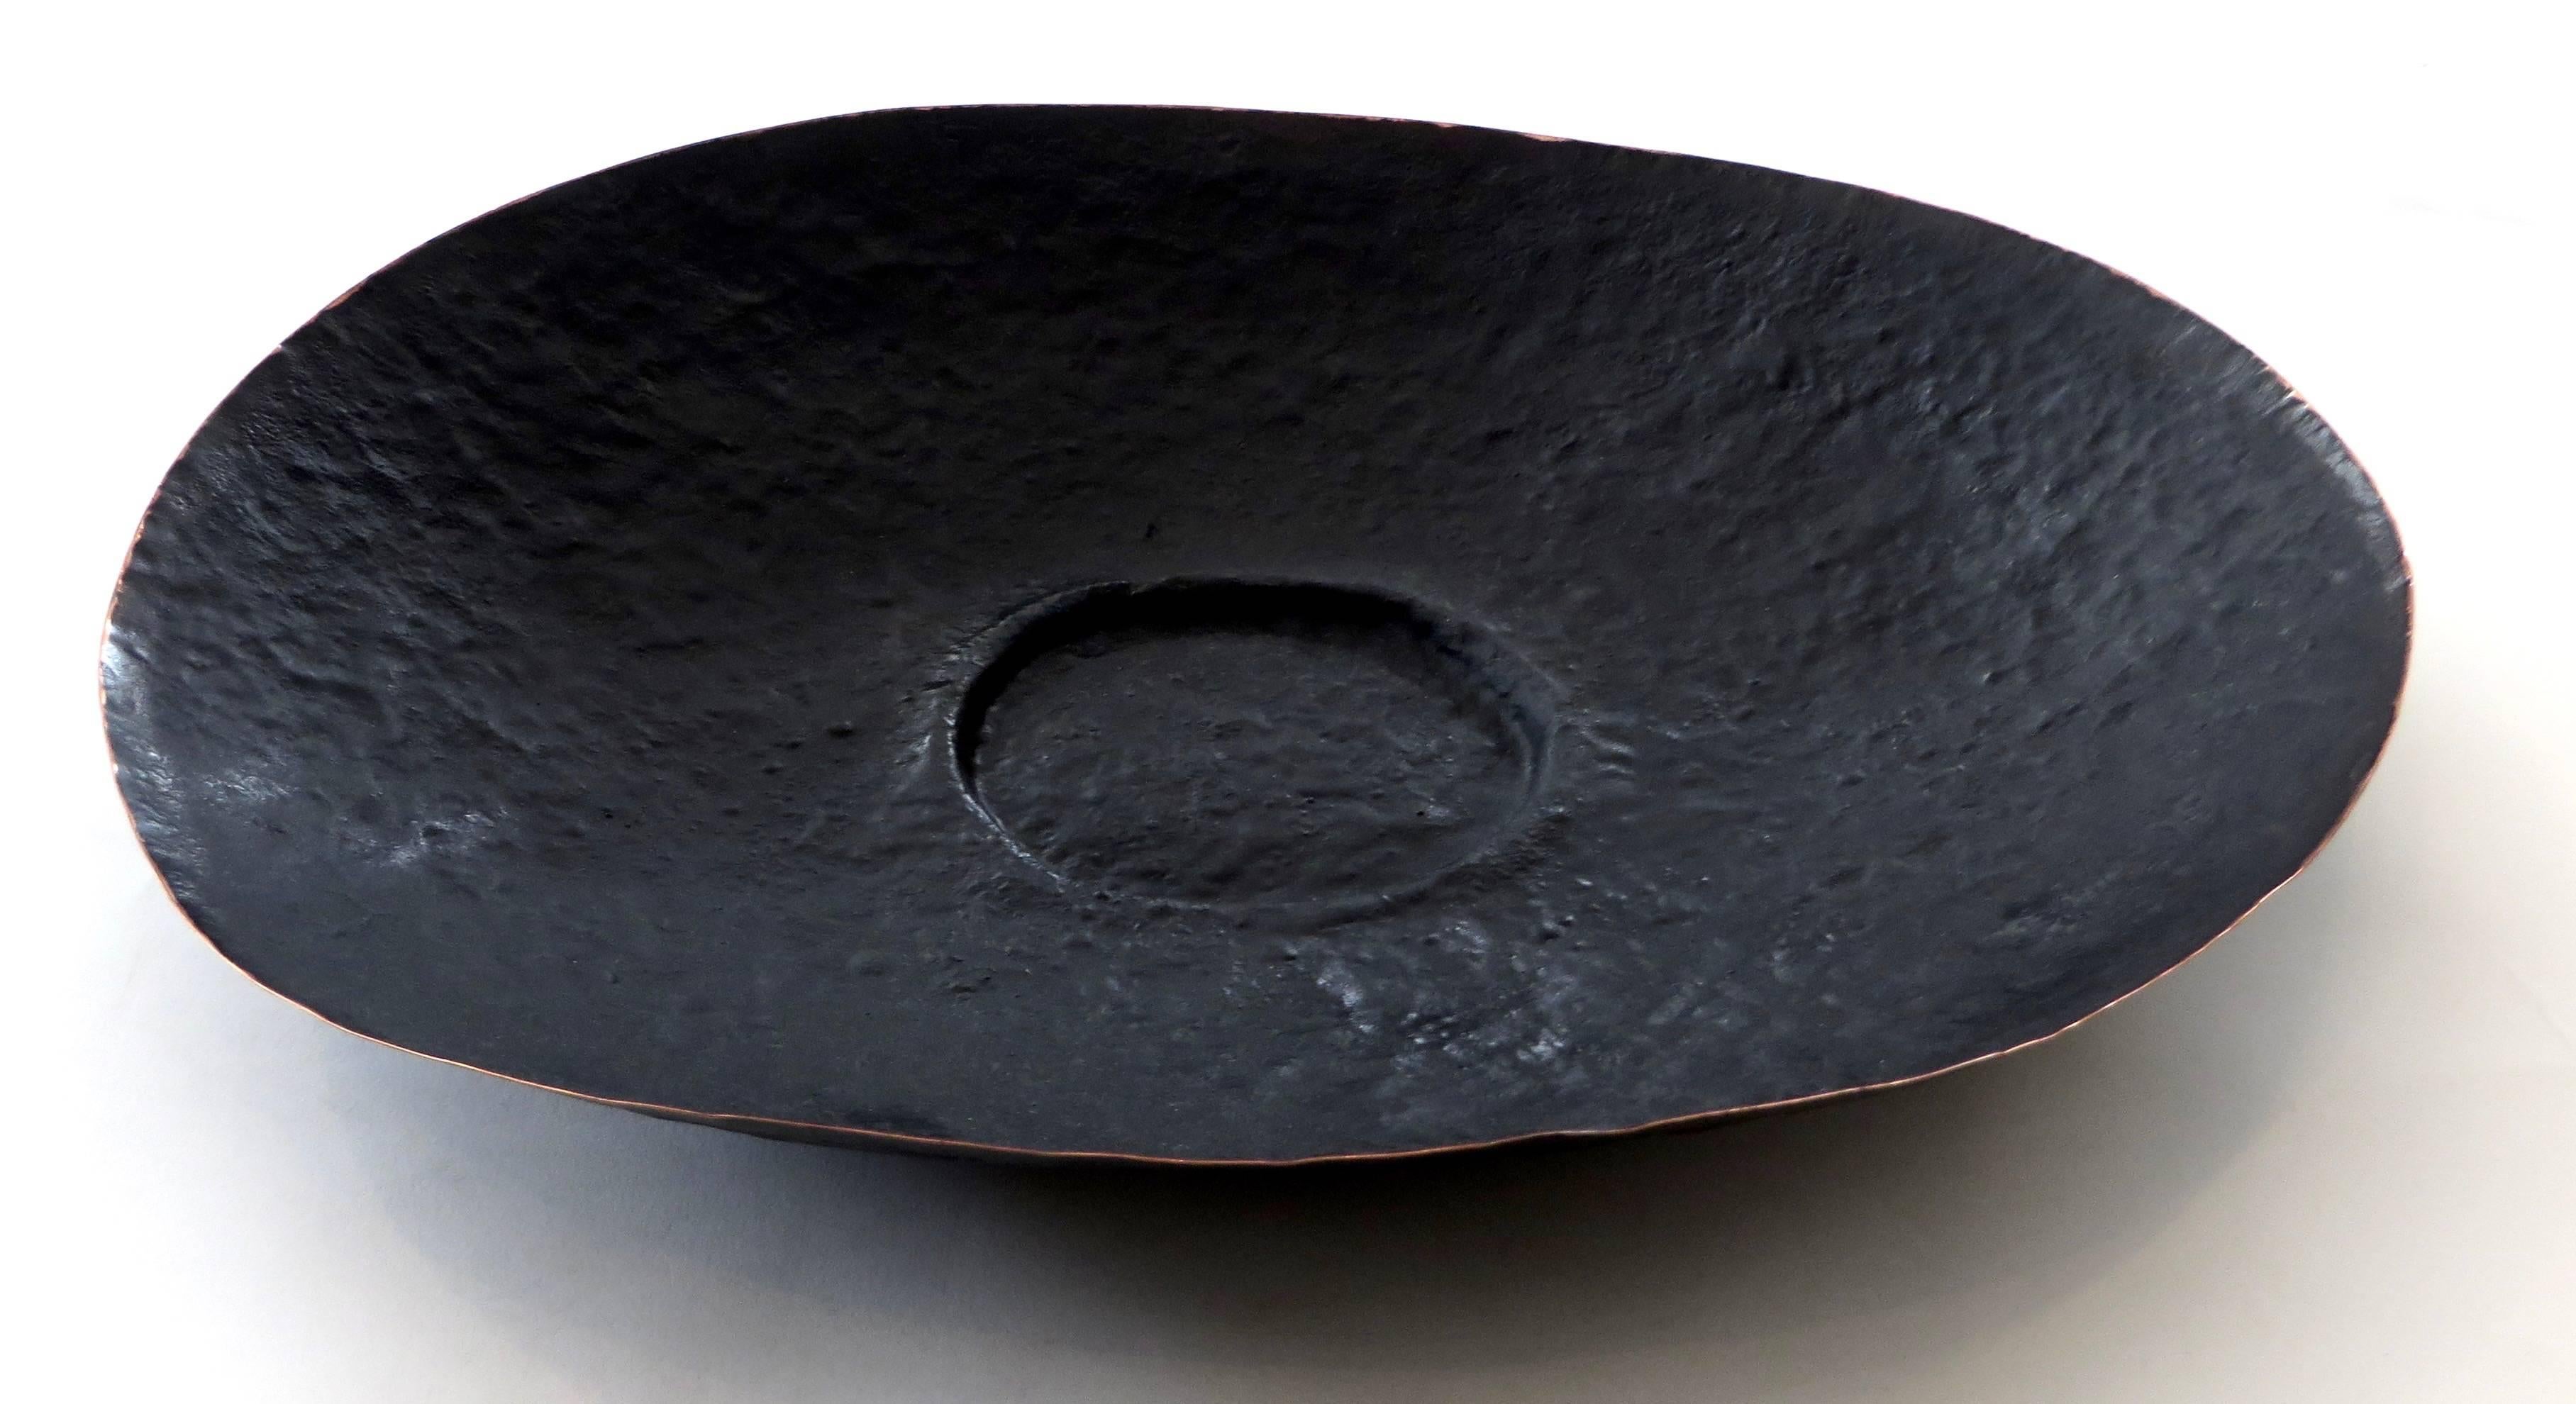 A hand-hammered copper sculptural and highly textured bowl by Hnter Gvtherer in the Poros series.
Each is piece unique.
This bowl features a round depression in the center creating a slight foot.
The surface has a slight high relief with a